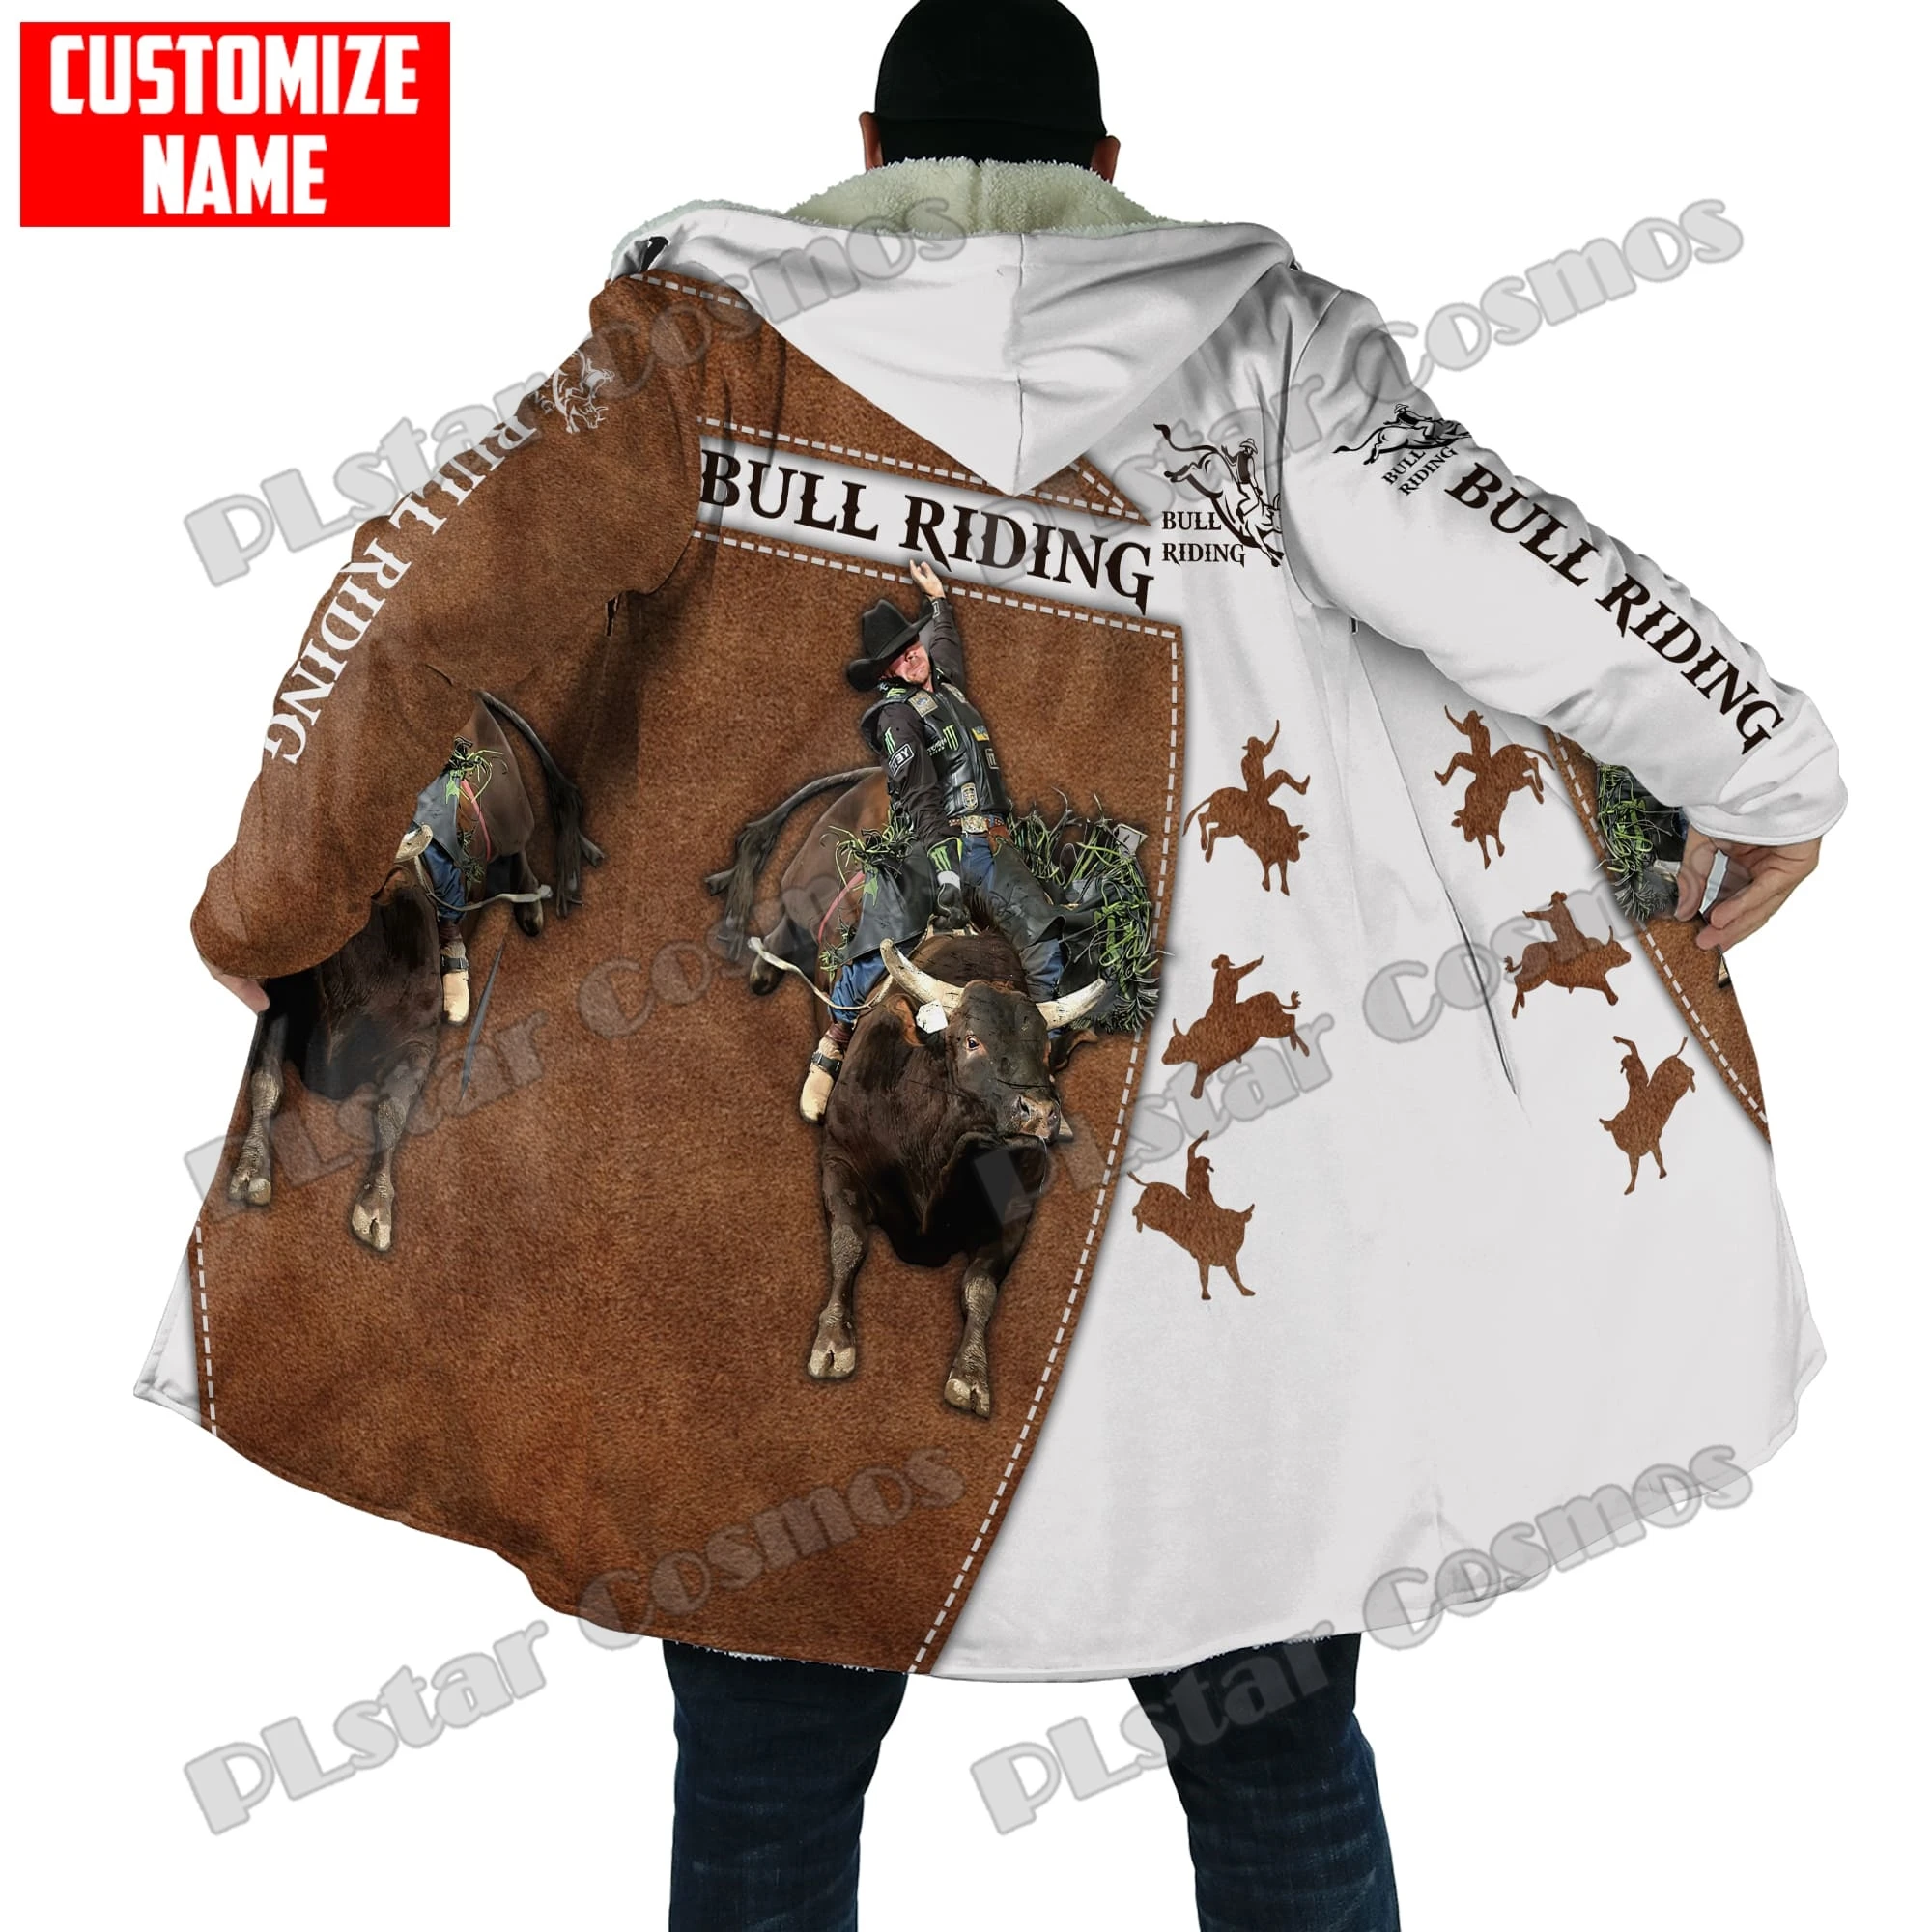 men s sheepskin driving gloves solid color thin single leather unlined touch screen fashion ripple riding motorcycle gloves Winter Fashion Mens Cloak Personalized Name Bull Riding 3D Printed Fleece Hooded cloak Unisex Casual Thick Warm Cape coat PJ08